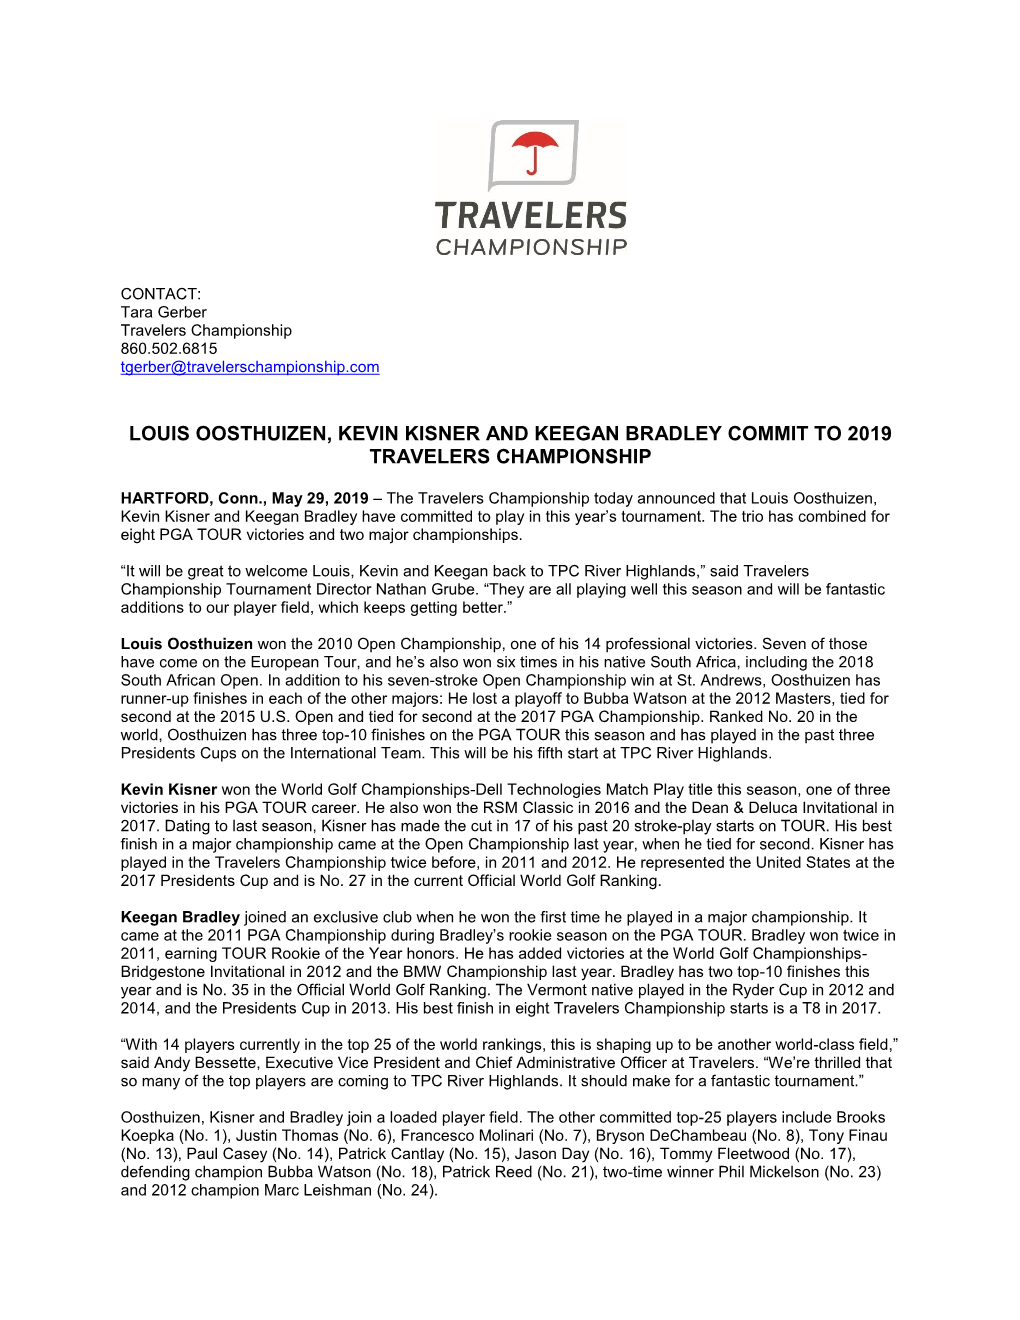 Louis Oosthuizen, Kevin Kisner and Keegan Bradley Commit to 2019 Travelers Championship